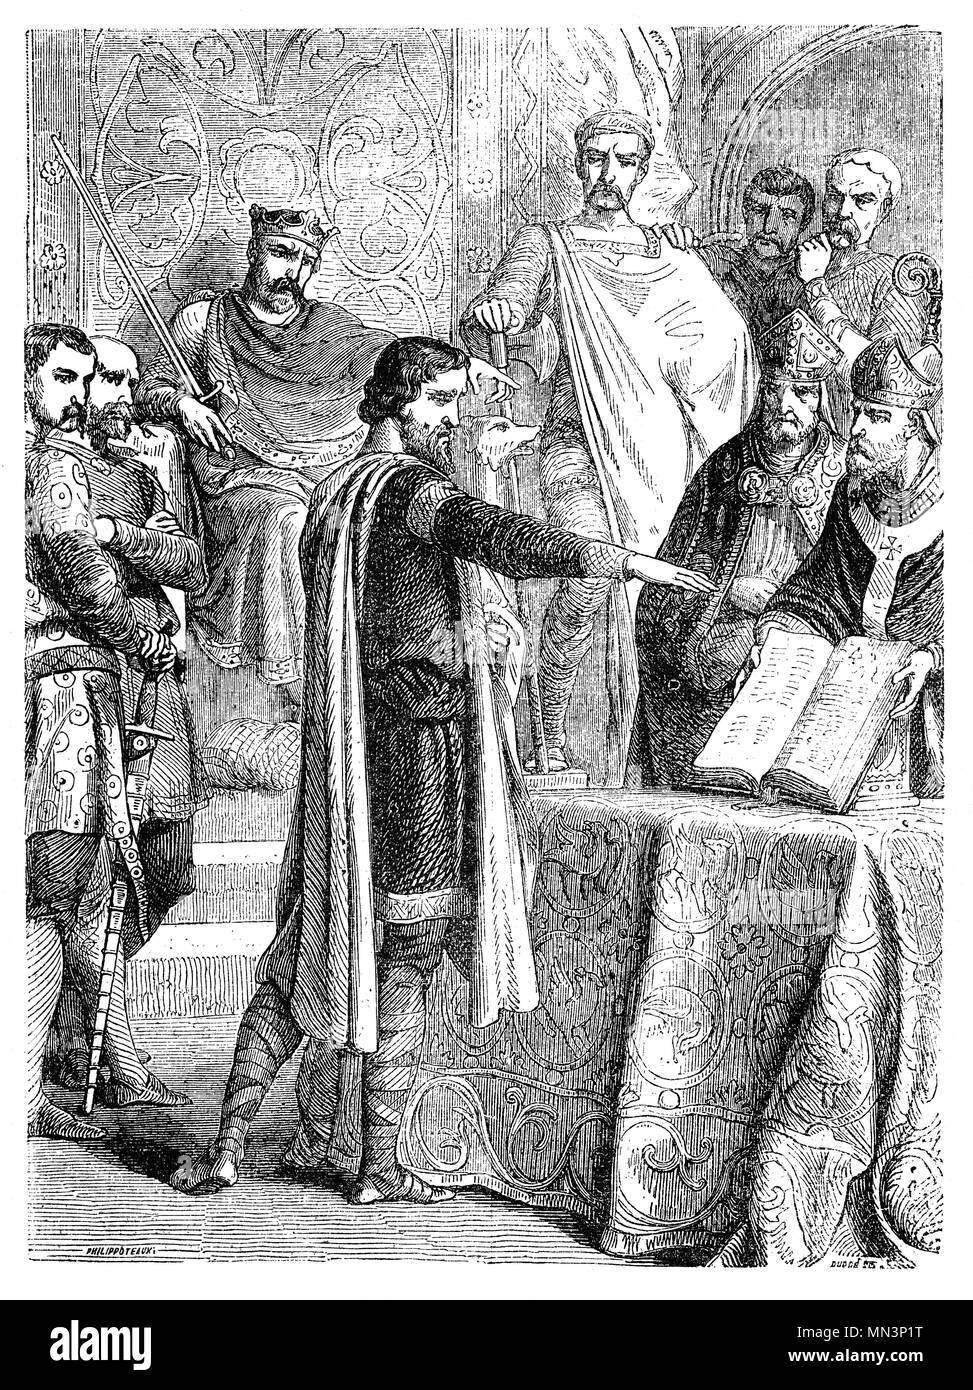 Harold Godwinson (1022–1066), often called Harold II, was the last Anglo-Saxon king of England. He reigned from 6 January 1066 until his death at the Battle of Hastings. Earlier, in 1064, Harold apparently was shipwrecked on the Normandy coast and later swore an oath on sacred relics to William to support his claim to the English throne. After Edward's death, Harold broke this alleged oath. And so on 14 October, Harold died fighting the Norman invaders led by William the Conqueror during the Norman conquest of England. Stock Photo